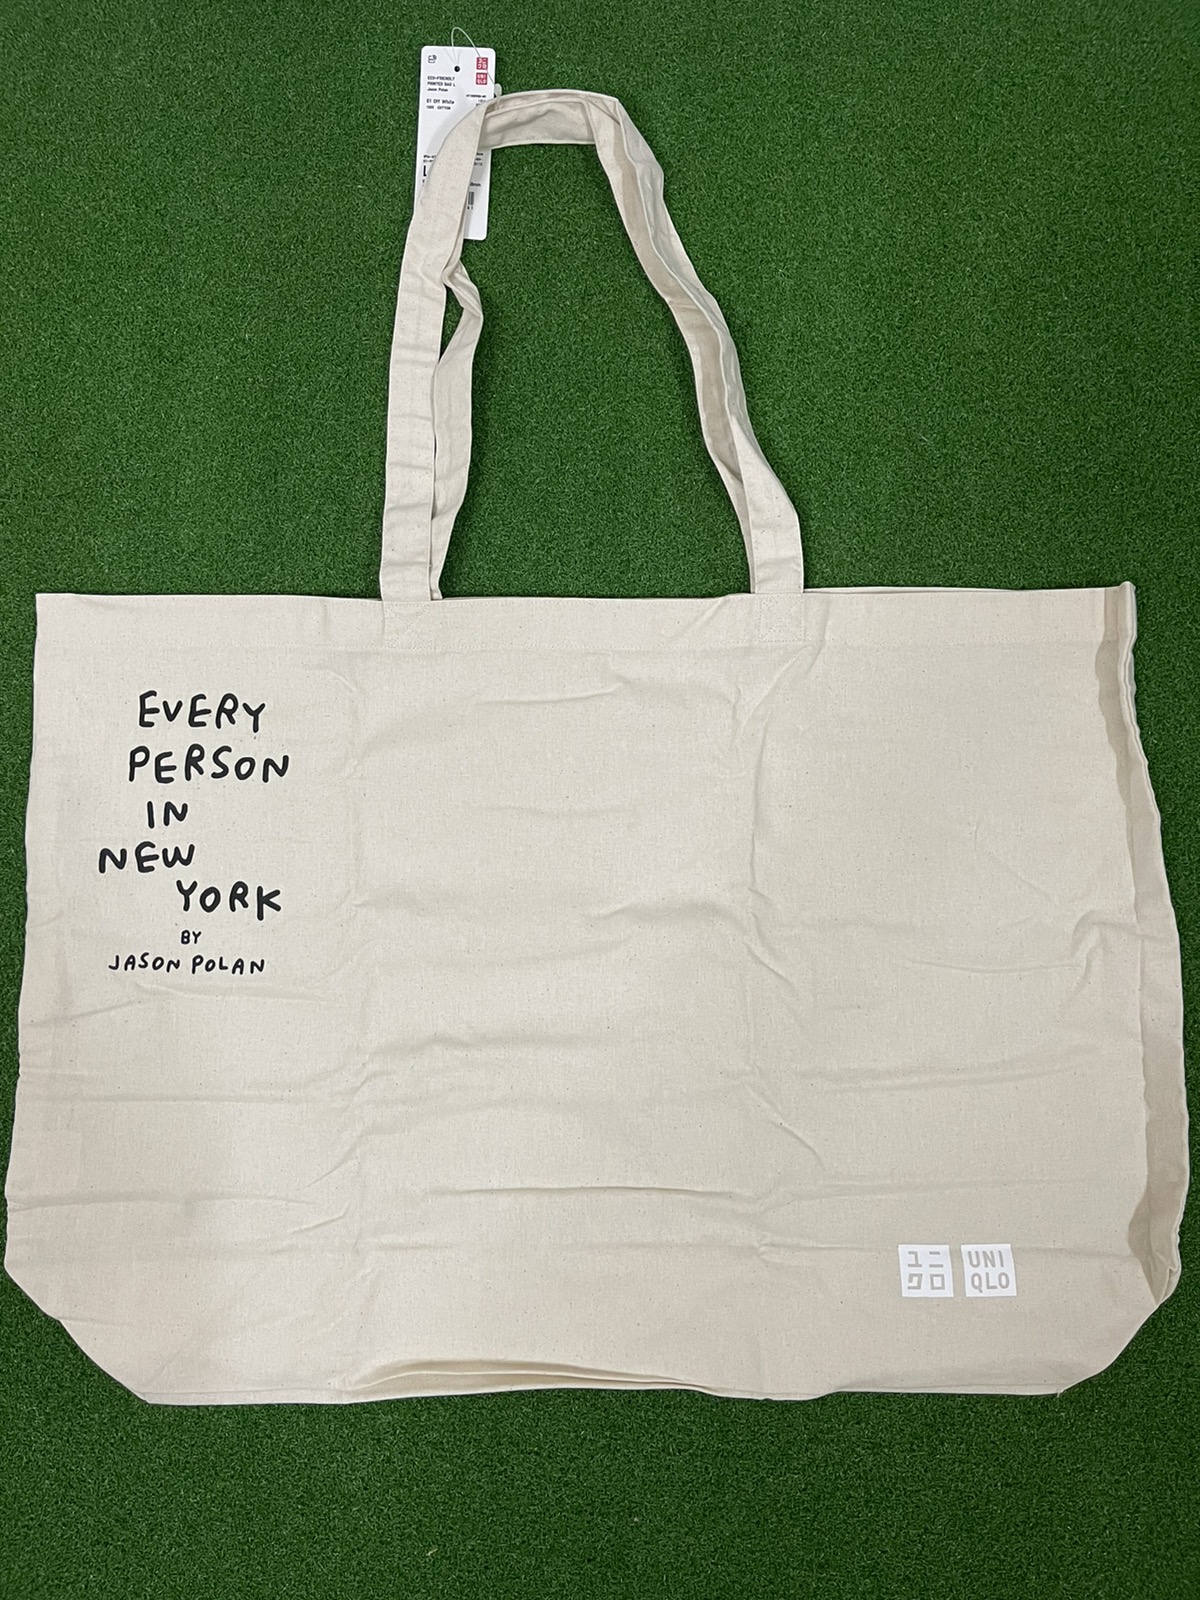 Outdoor Style Go Out! - New Jason Polan Tote Bag Limited Edition / Uniqlo / Eva - 11